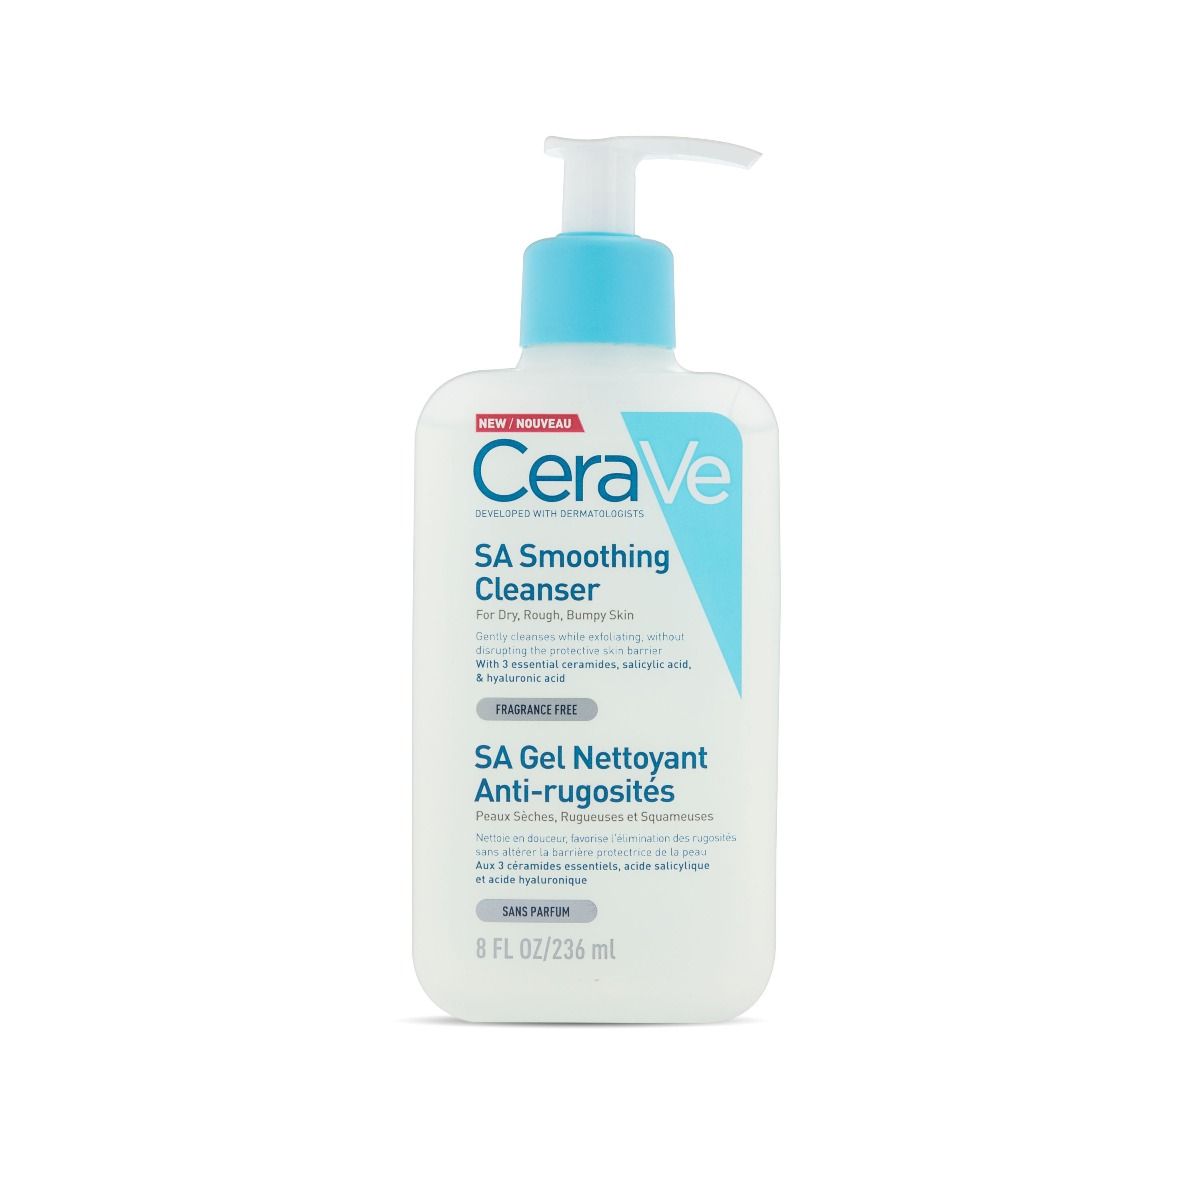 CeraVe SA Smoothing Cleanser for Dry, Rough and Bumpy Skin, 236ml (Country of Origin: France)